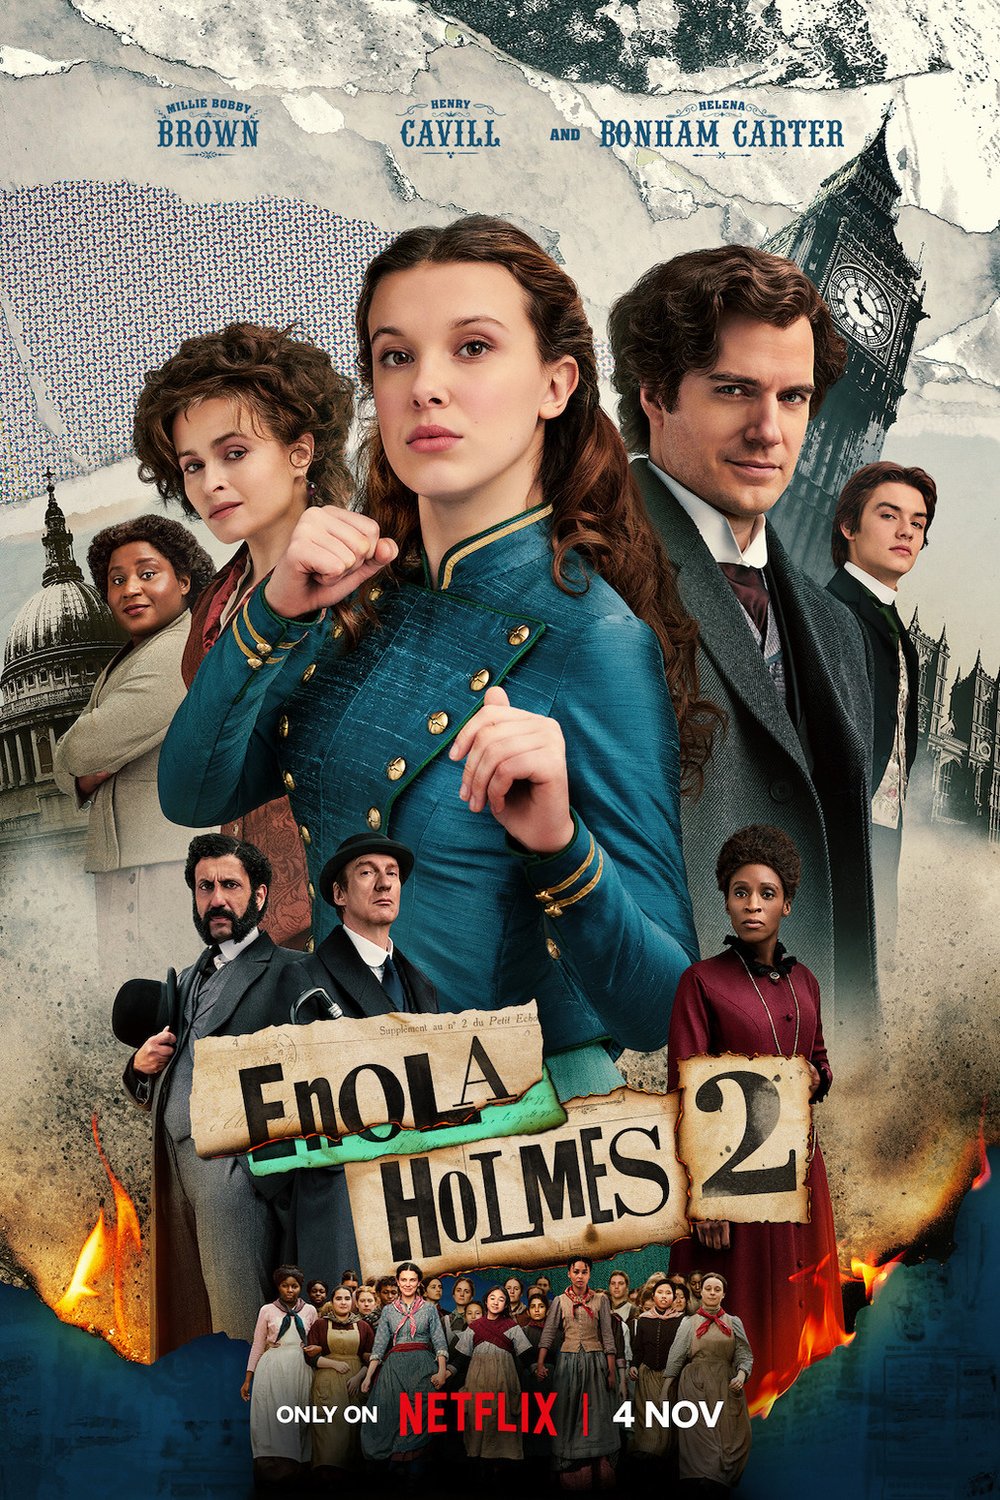 Poster of the movie Enola Holmes 2